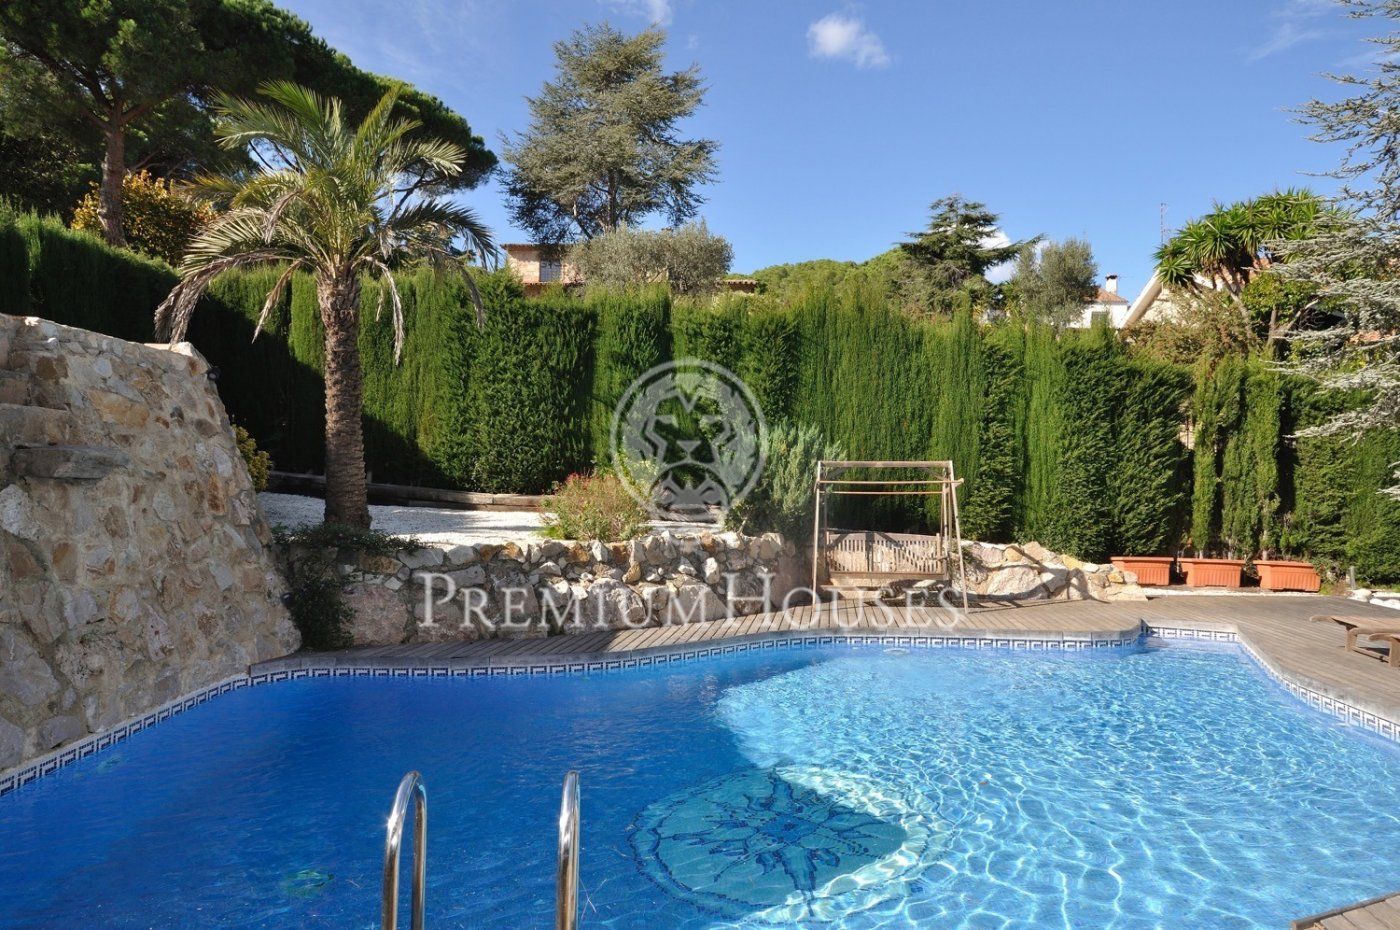 Nature and pool environment in Argentona - Costa BCN